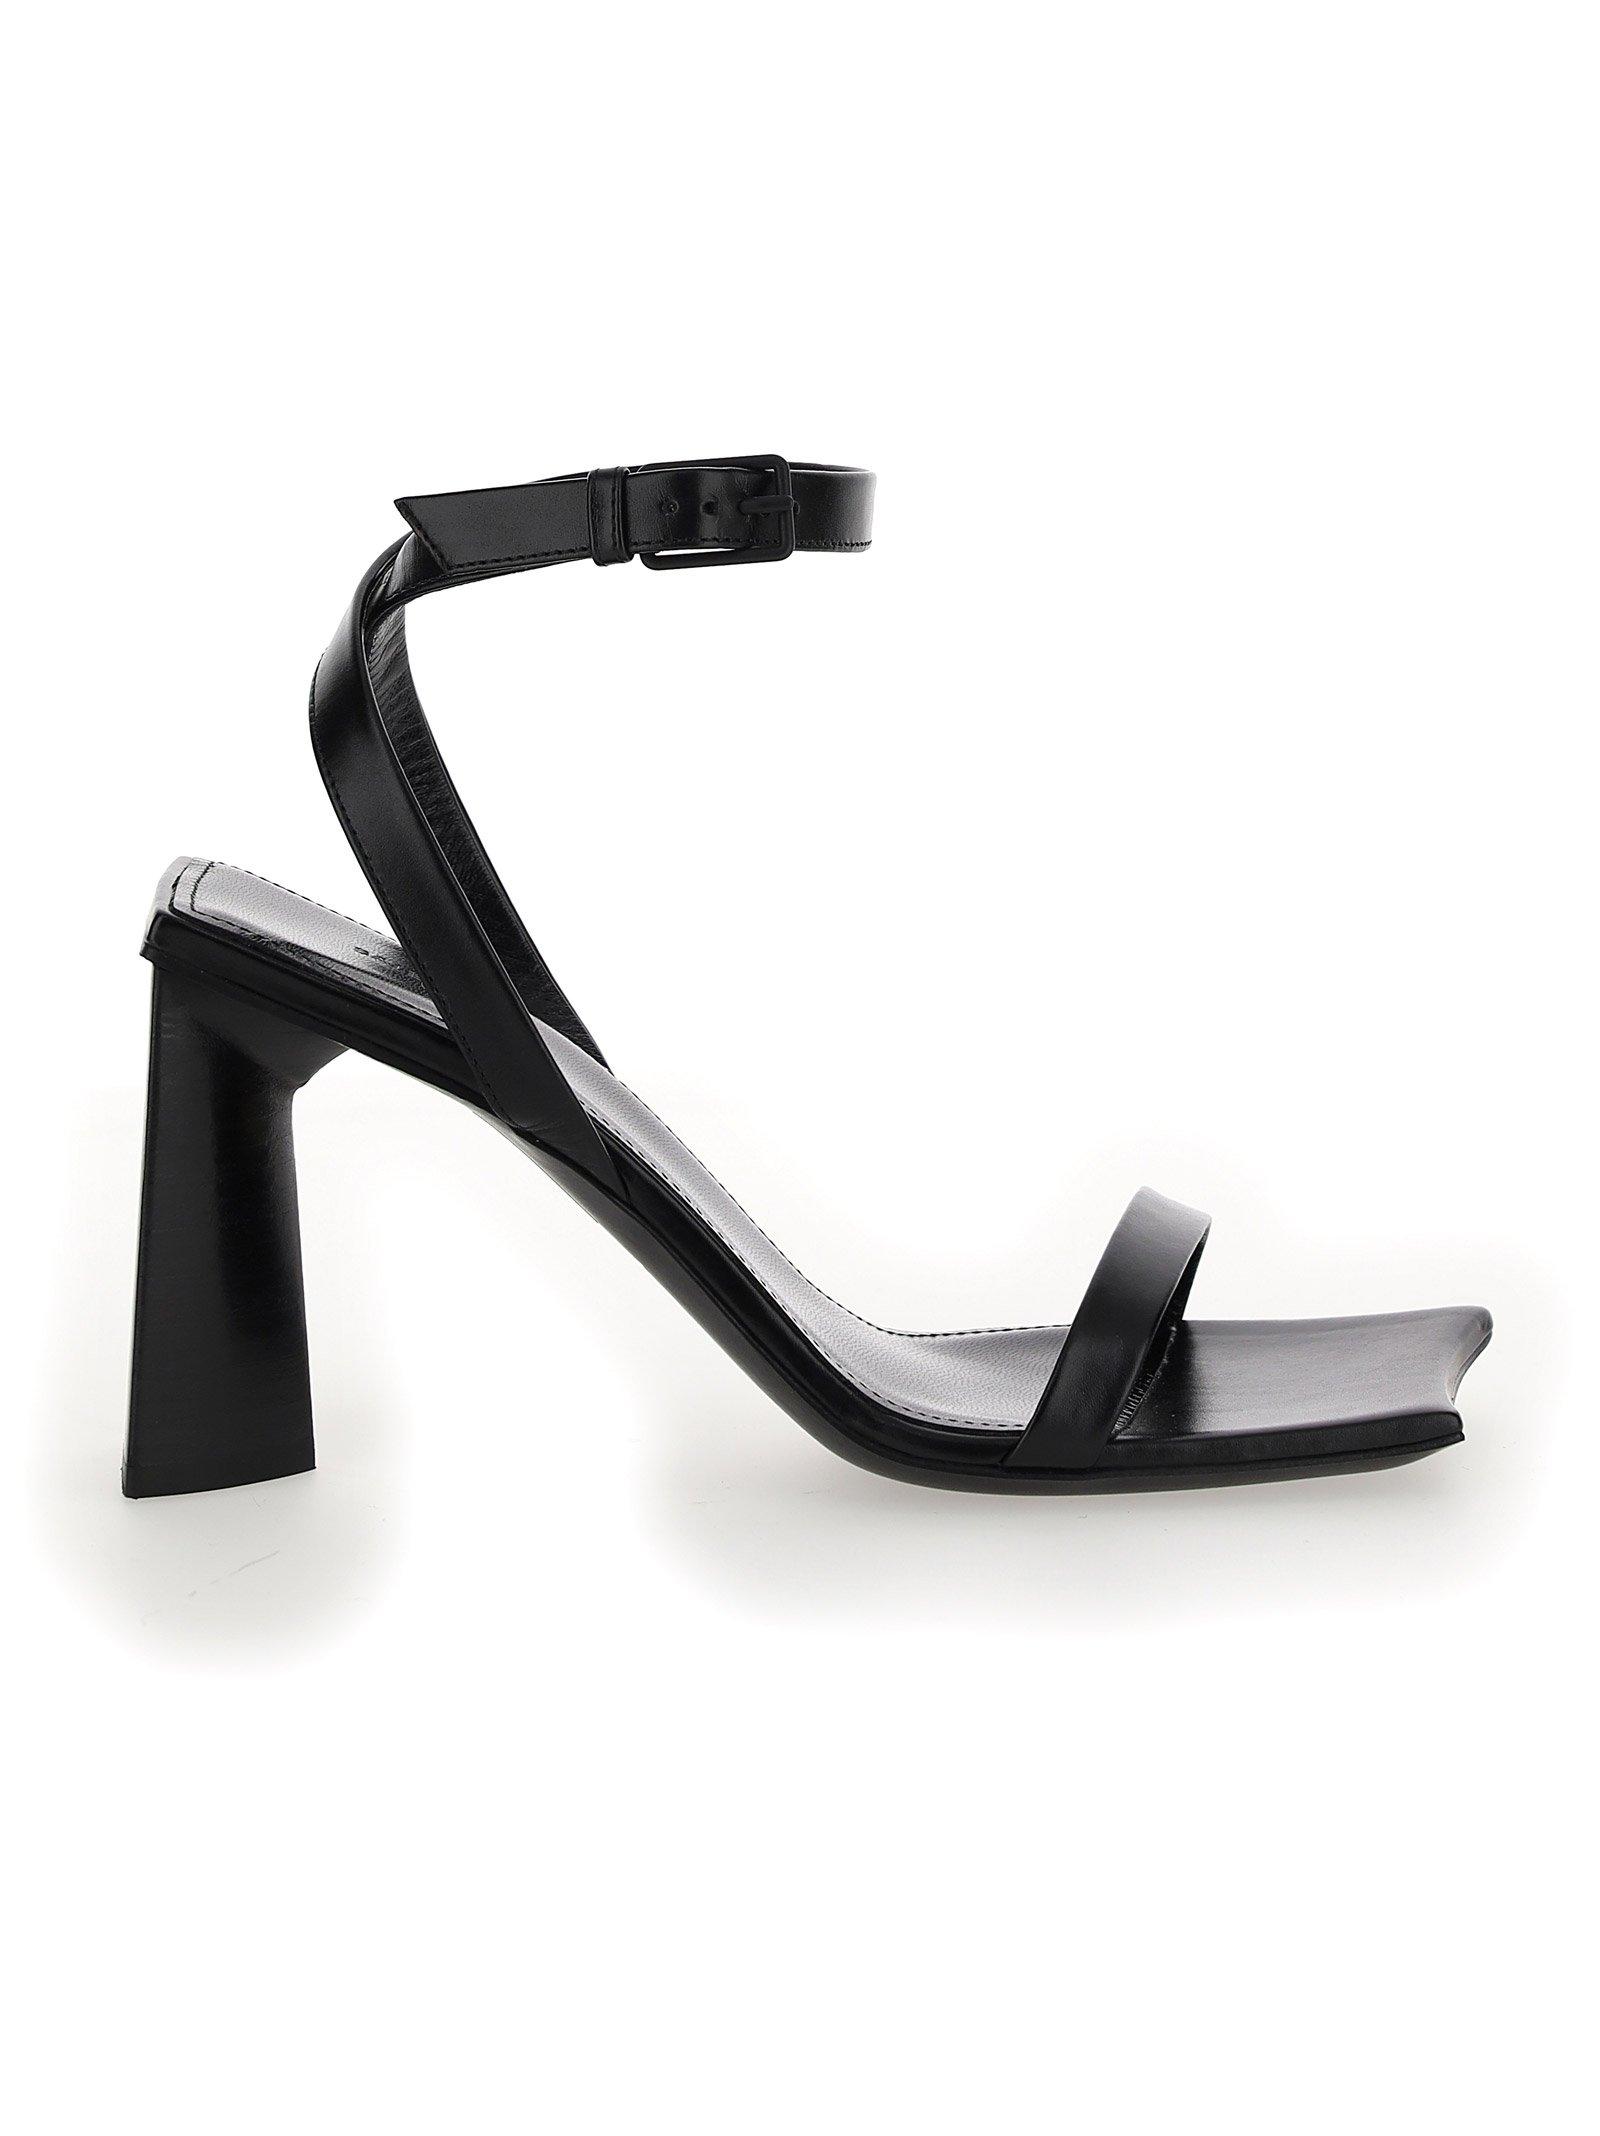 Balenciaga Leather Moon 90 Ankle Strap Sandals in Black - Lyst